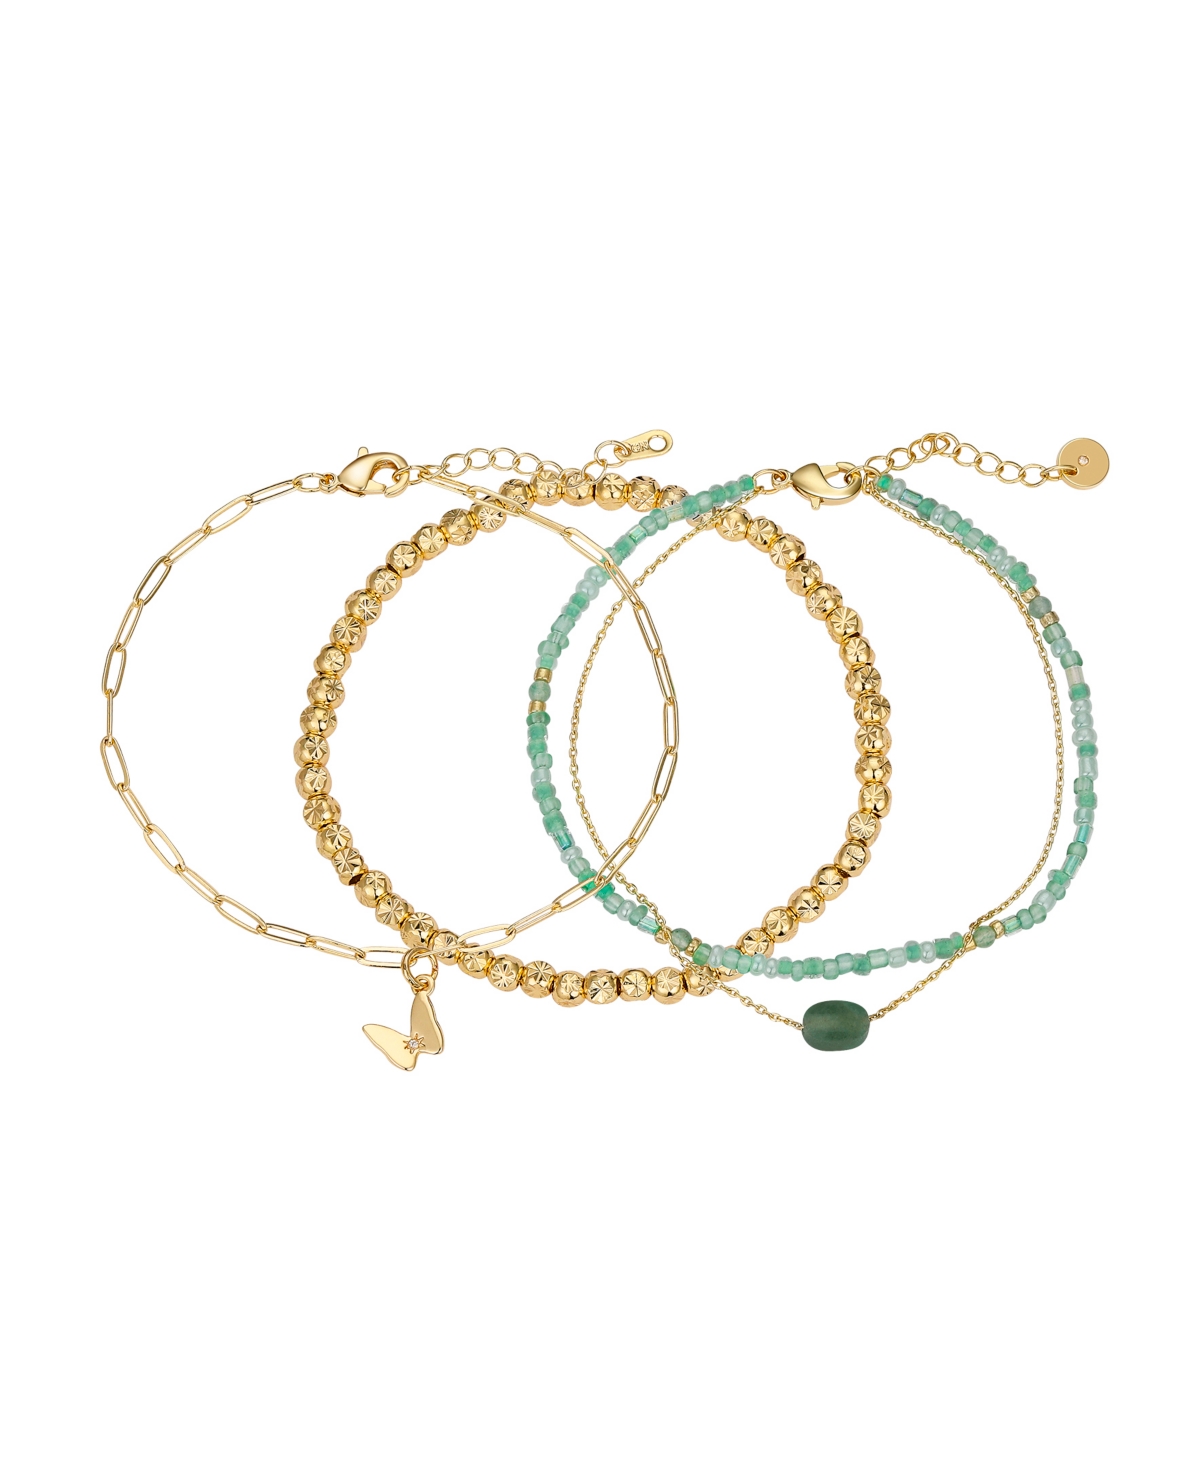 Green Aventurine and Cubic Zirconia Butterfly Bracelet Set - Gold